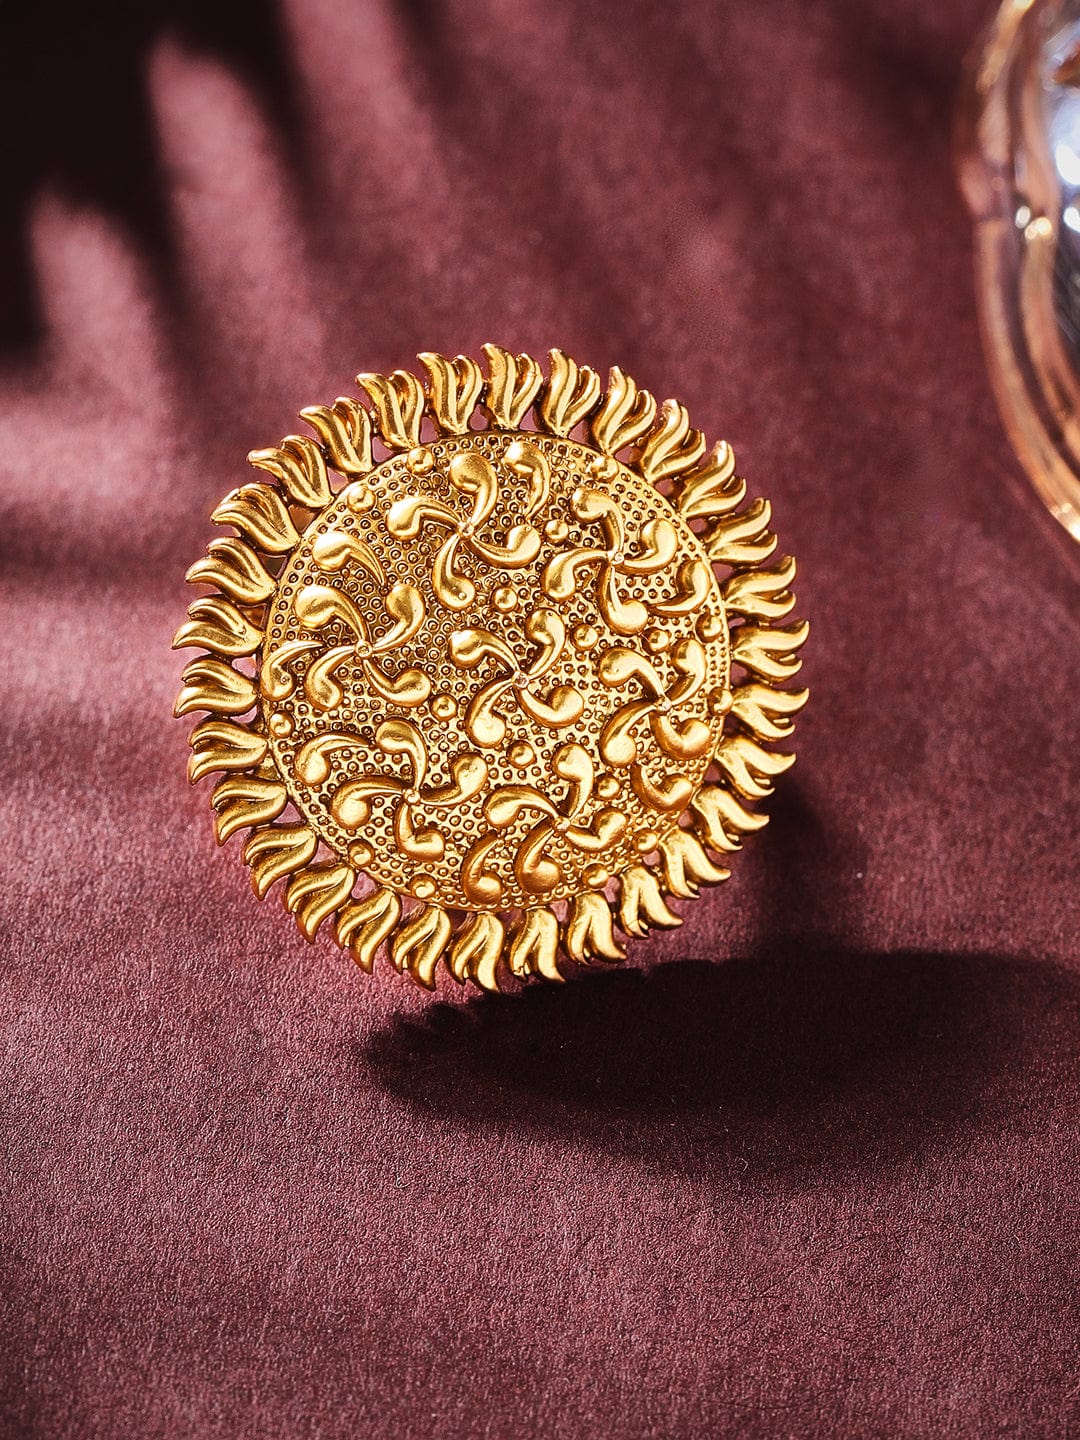 Rubans Luxury 22K Pure Gold Plated Finely Detailed Temple Statement Ring. Rings